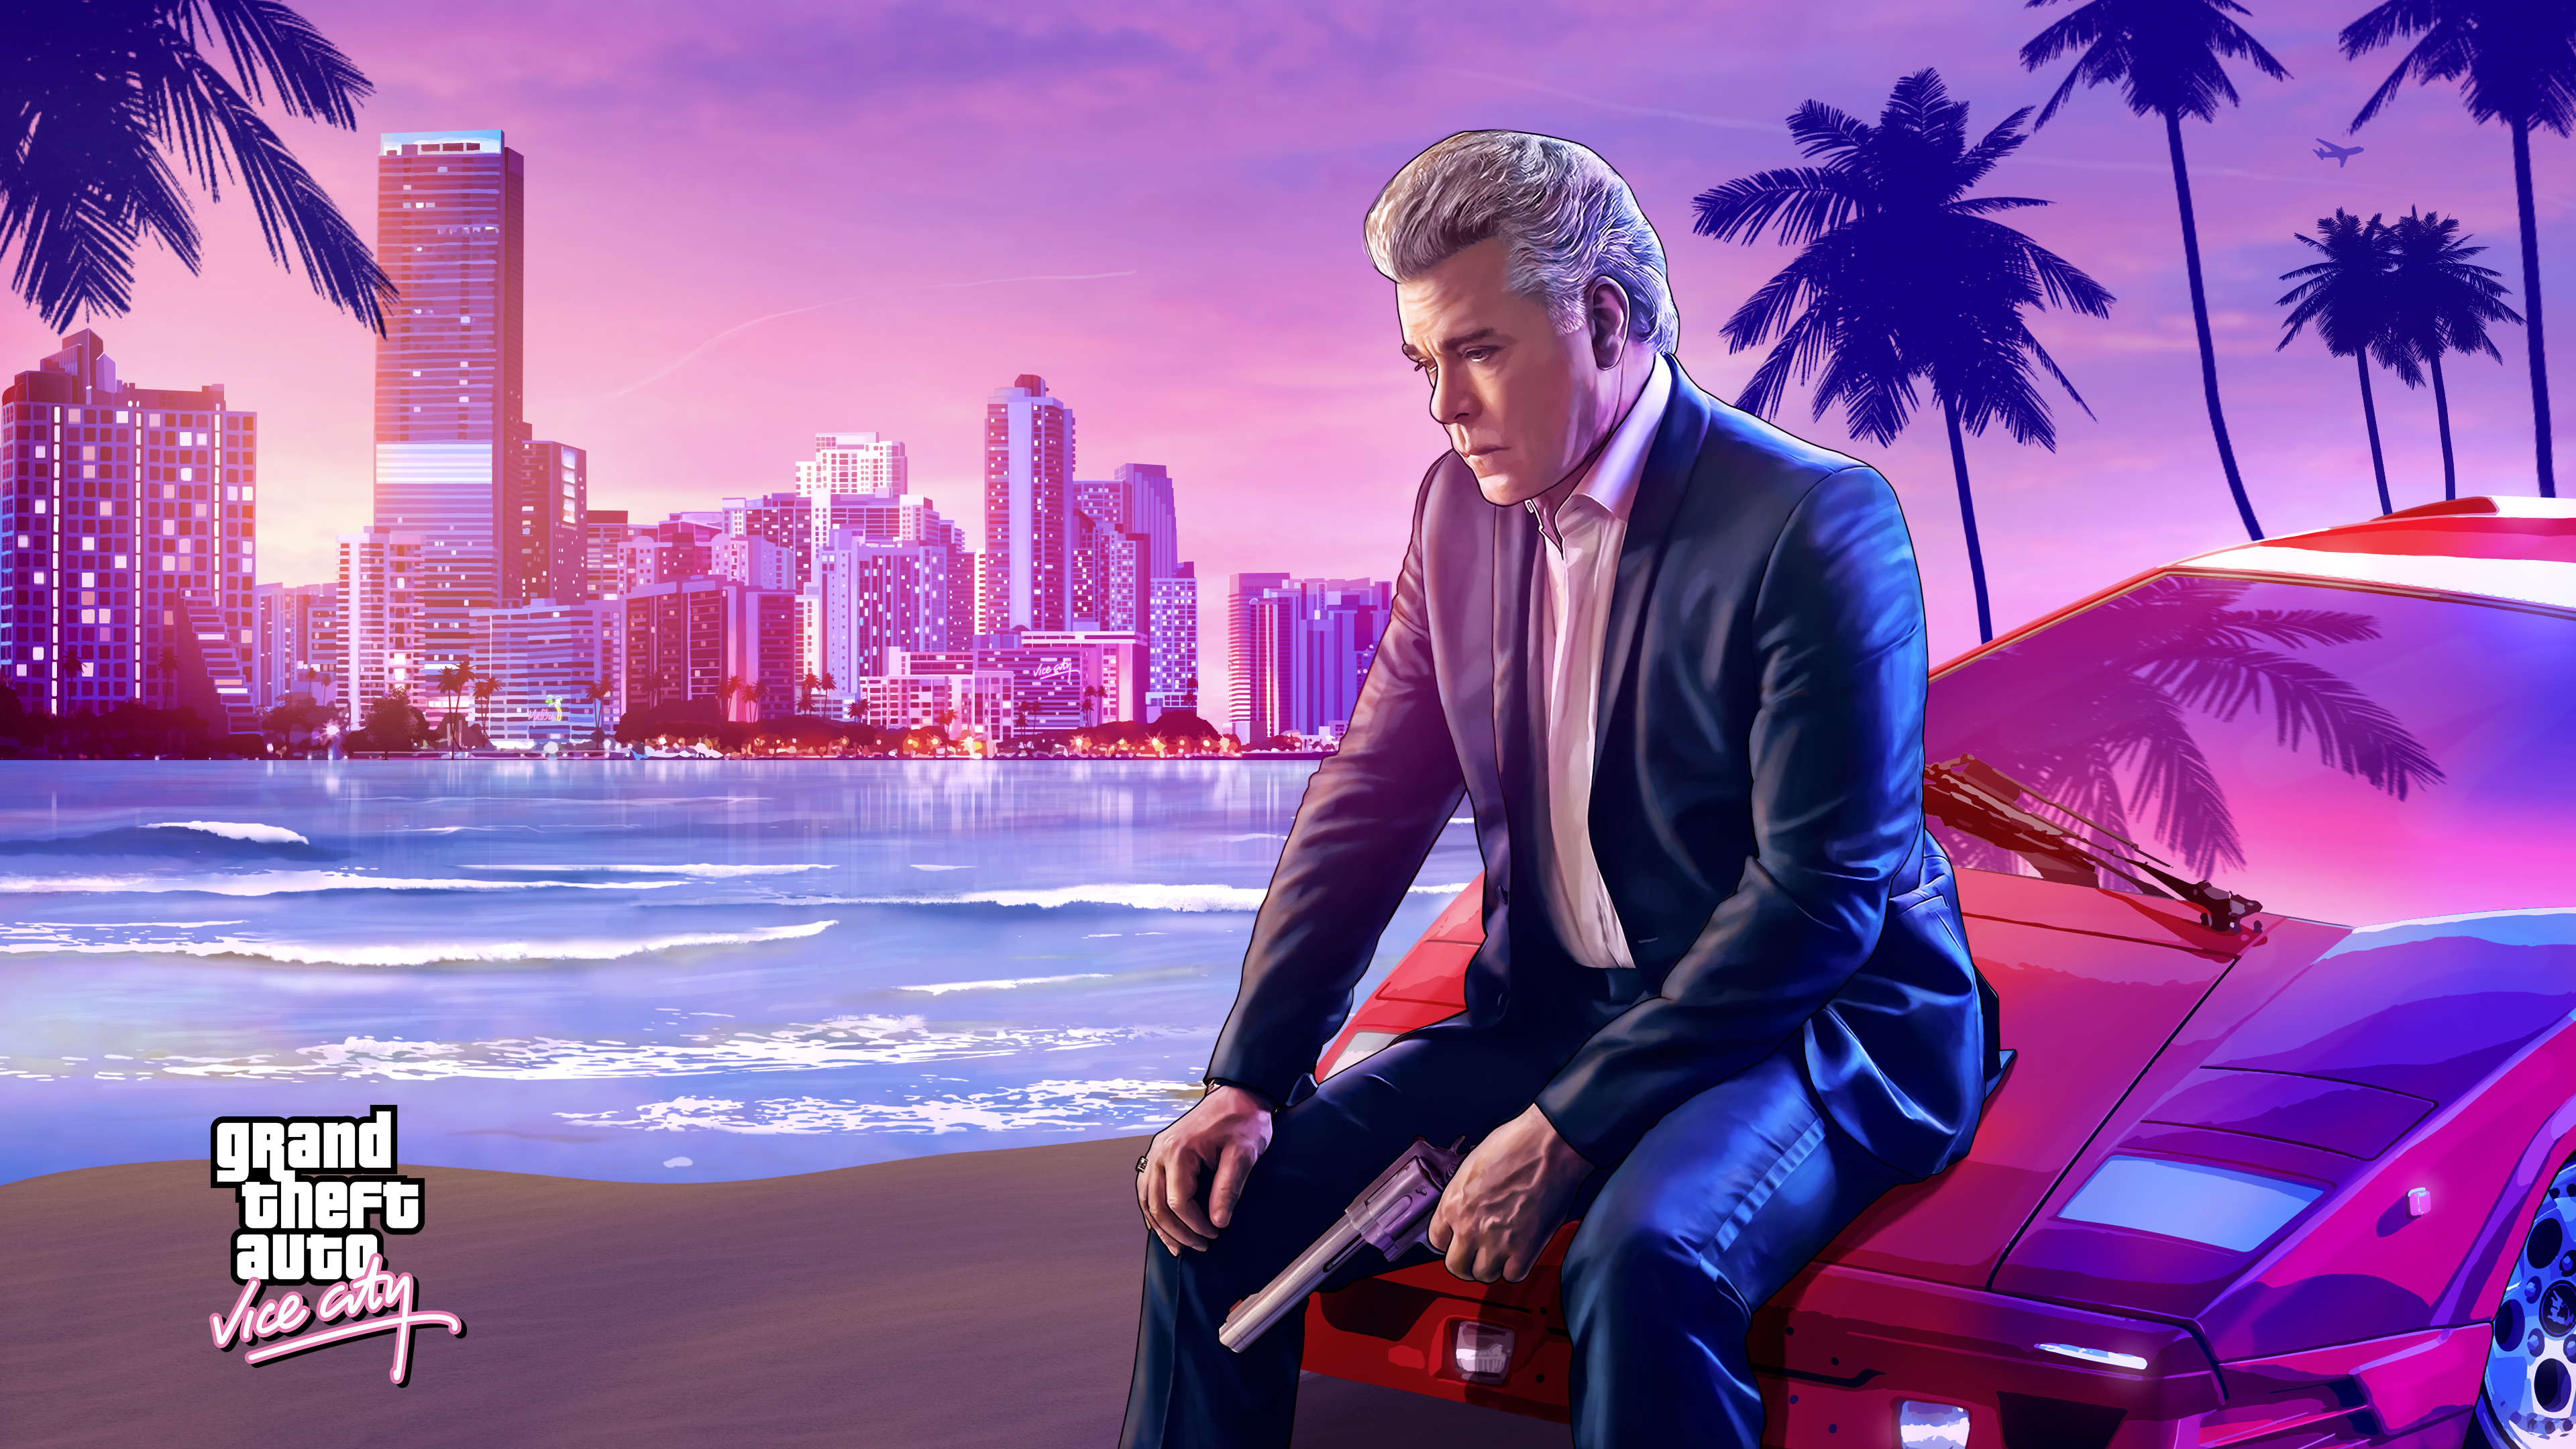 Grand Theft Auto: Vice City Phone Wallpapers. 